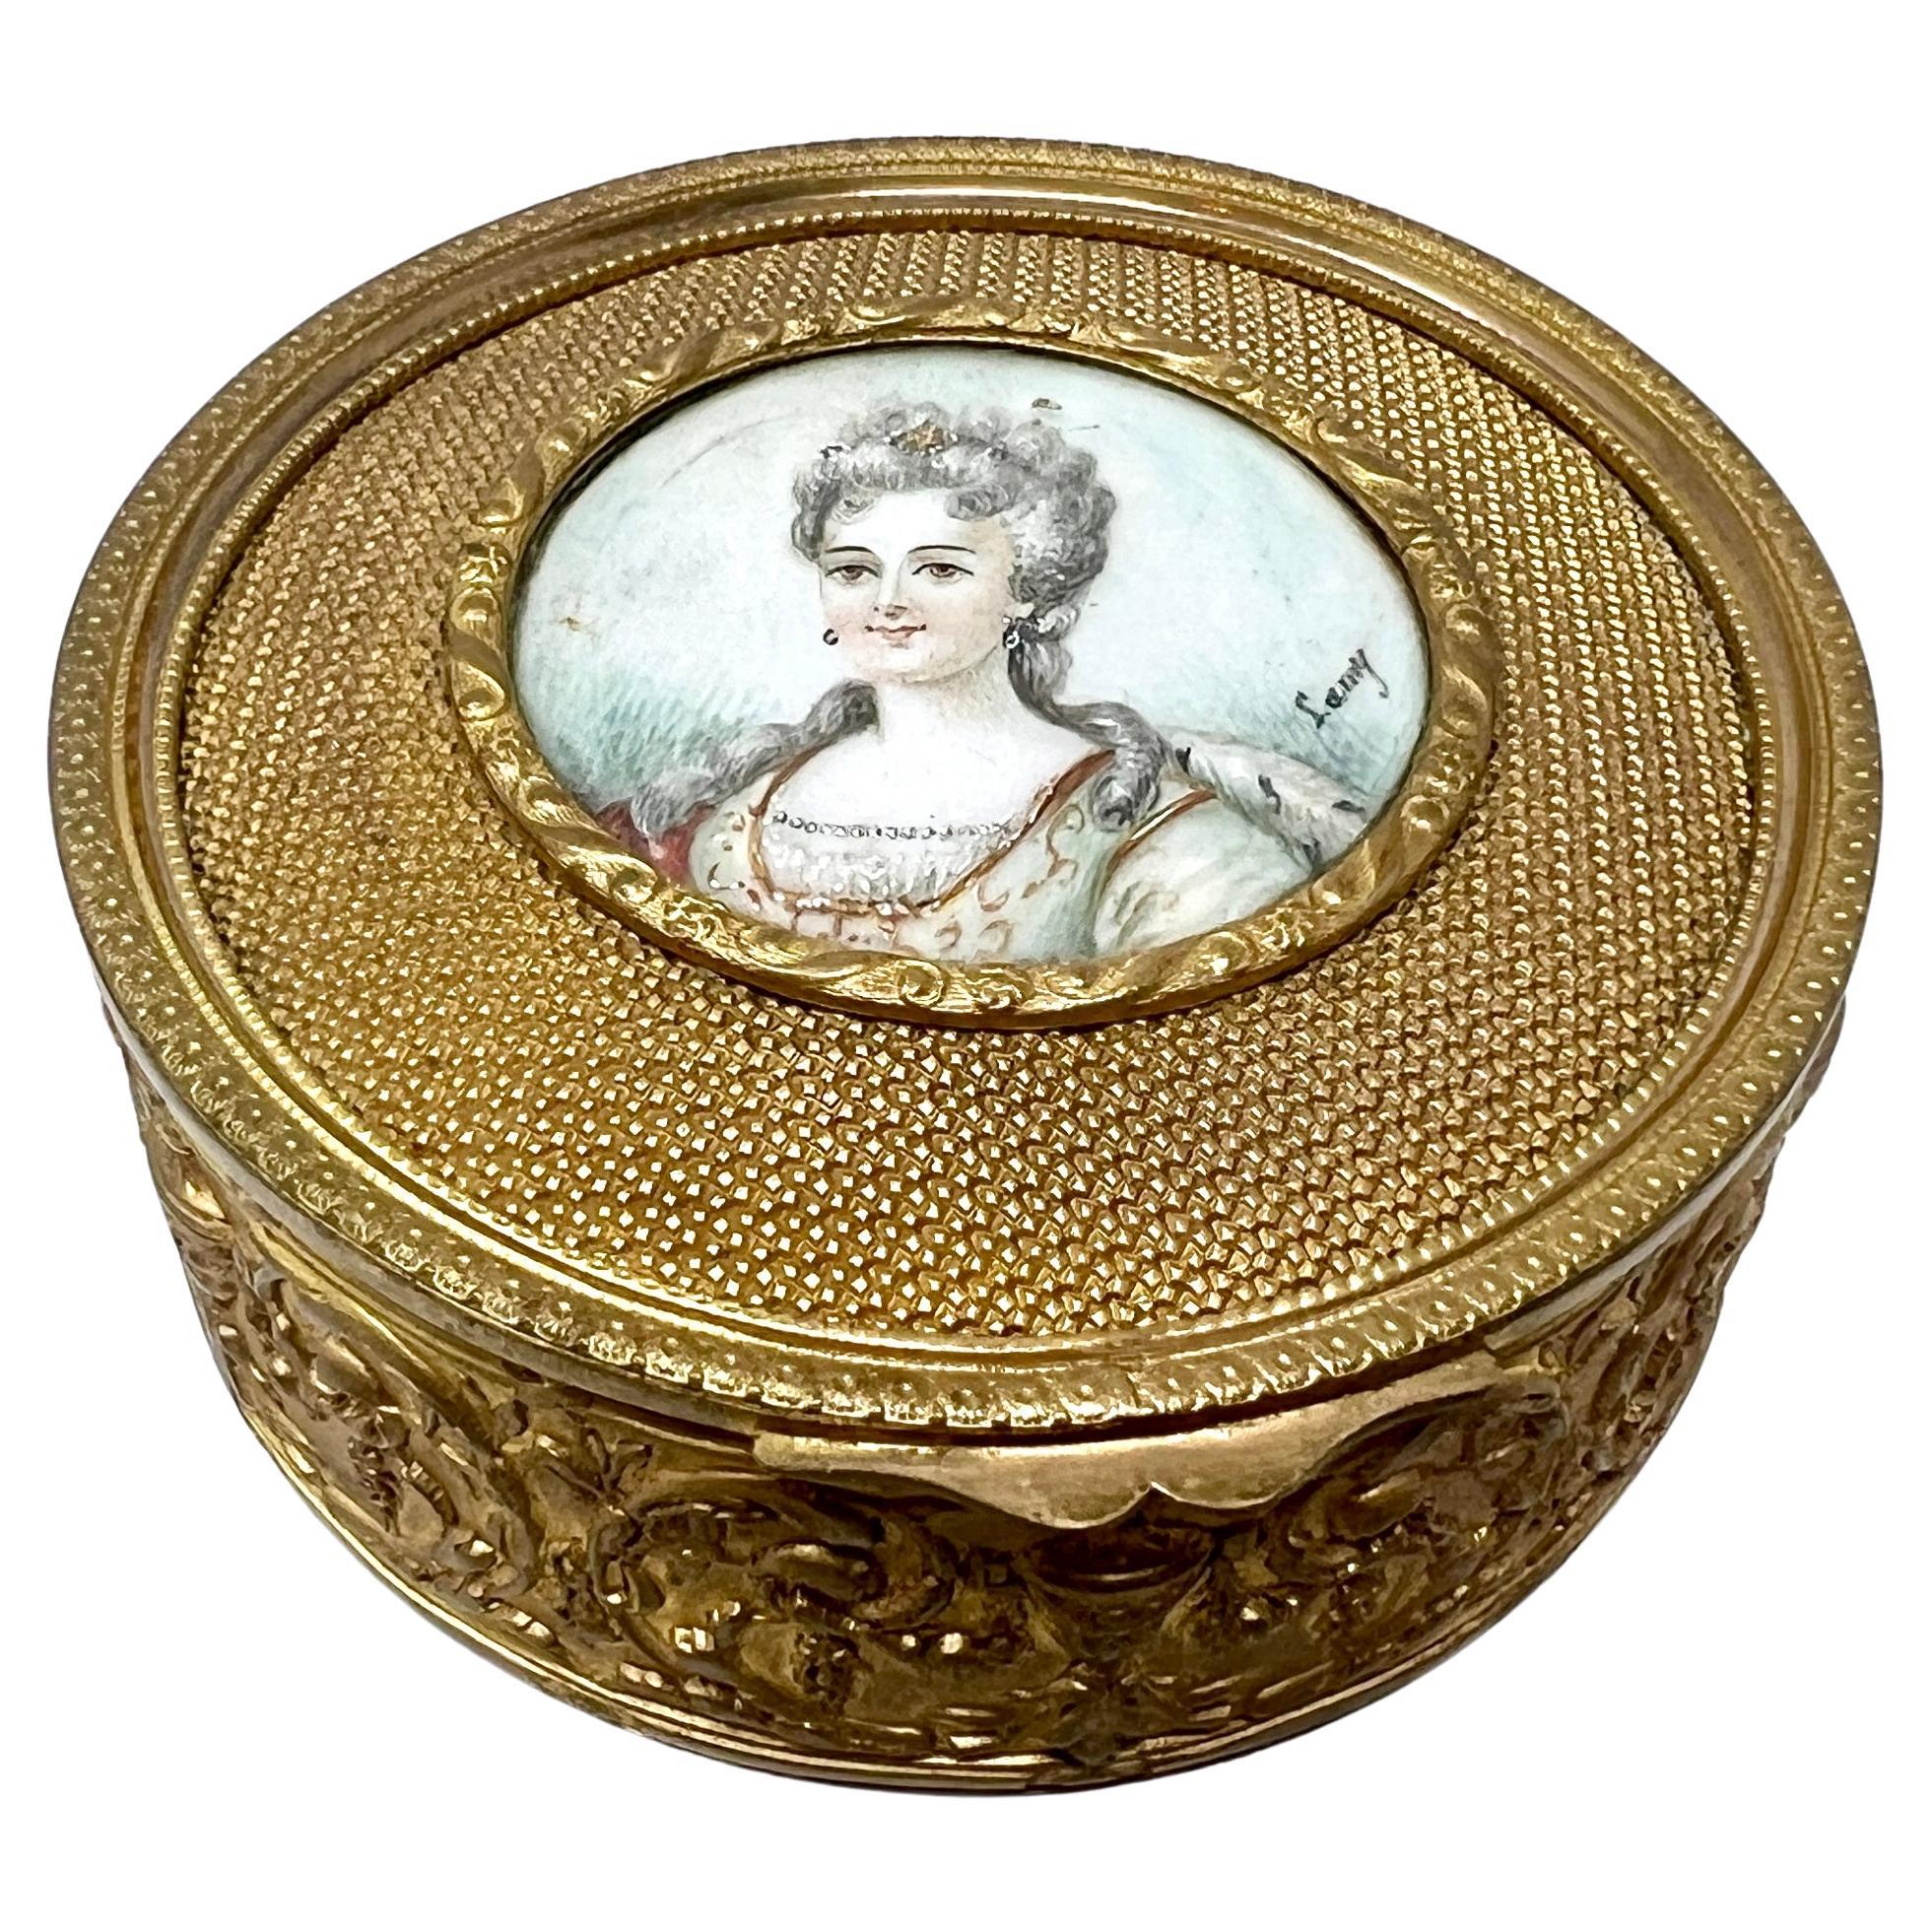 Antique French Gold Bronze Box With Hand Painted Porcelain Miniature, Circa 1880